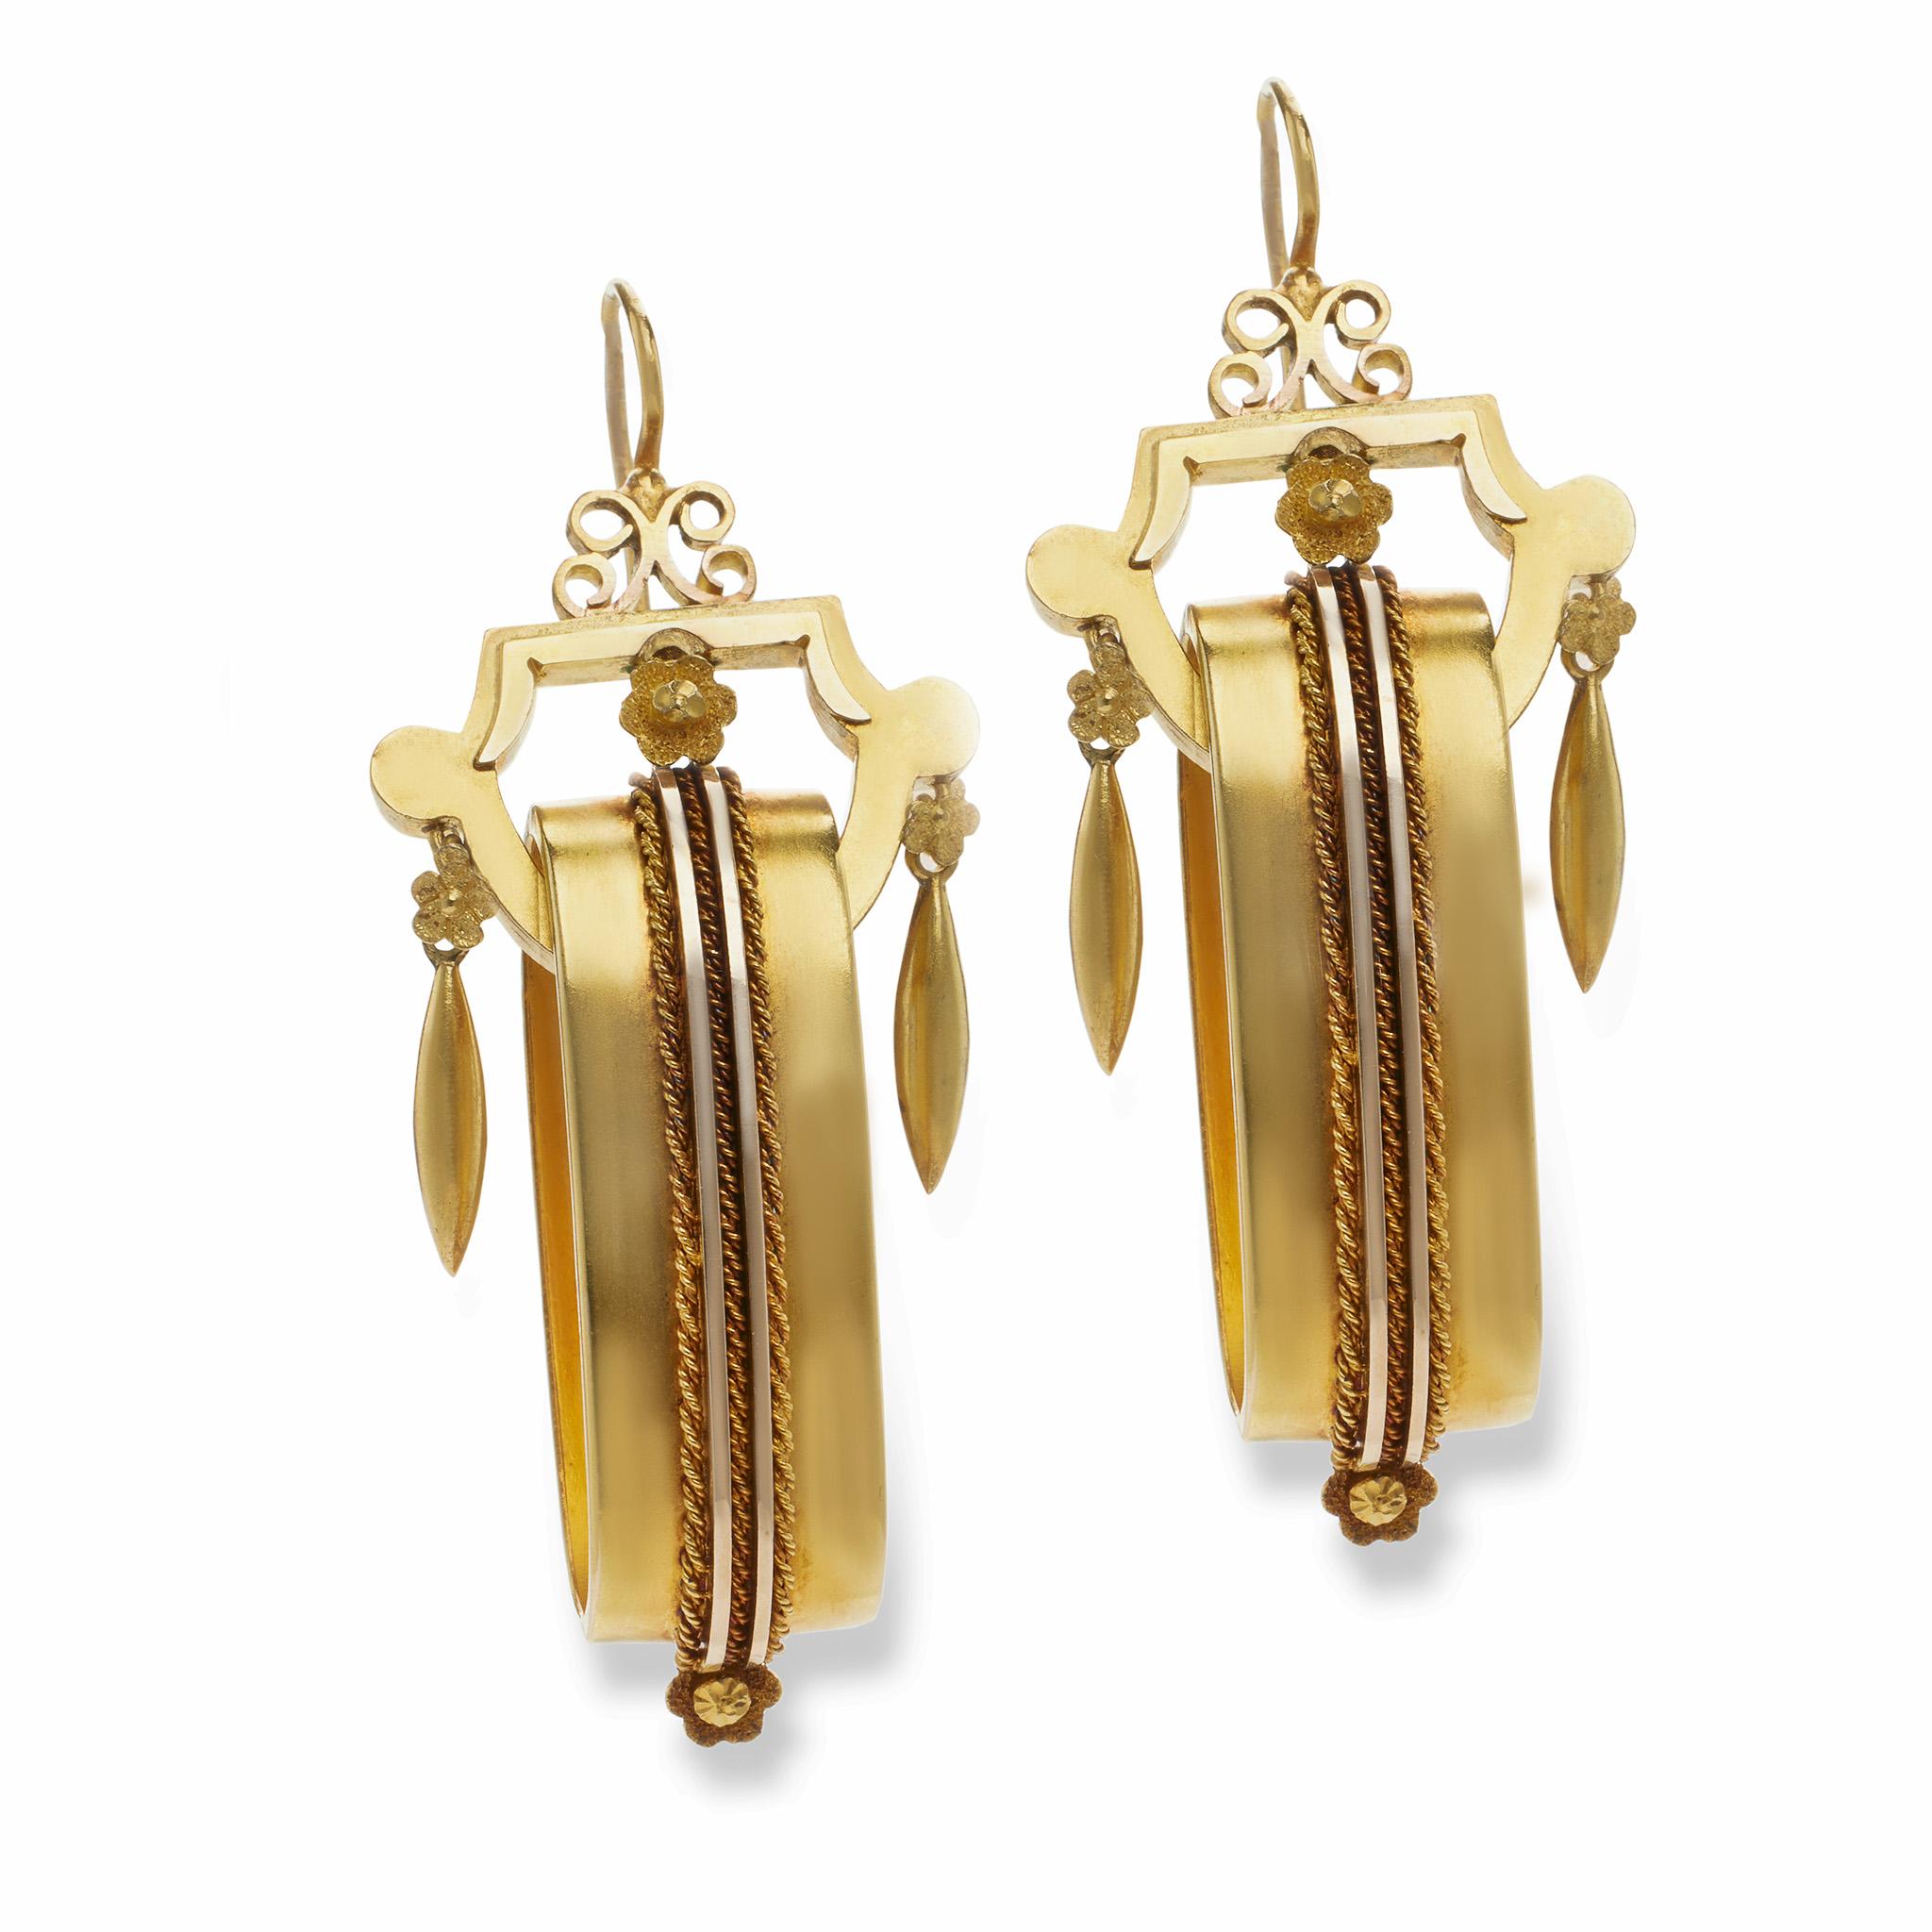 Likely made in England in the 1860s-70s, these 15k gold earrings were created in the Revival style. Each pendant earrings is designed as a geometric scrolling top suspending a freely-set central elongated ring with vertical double line motif and